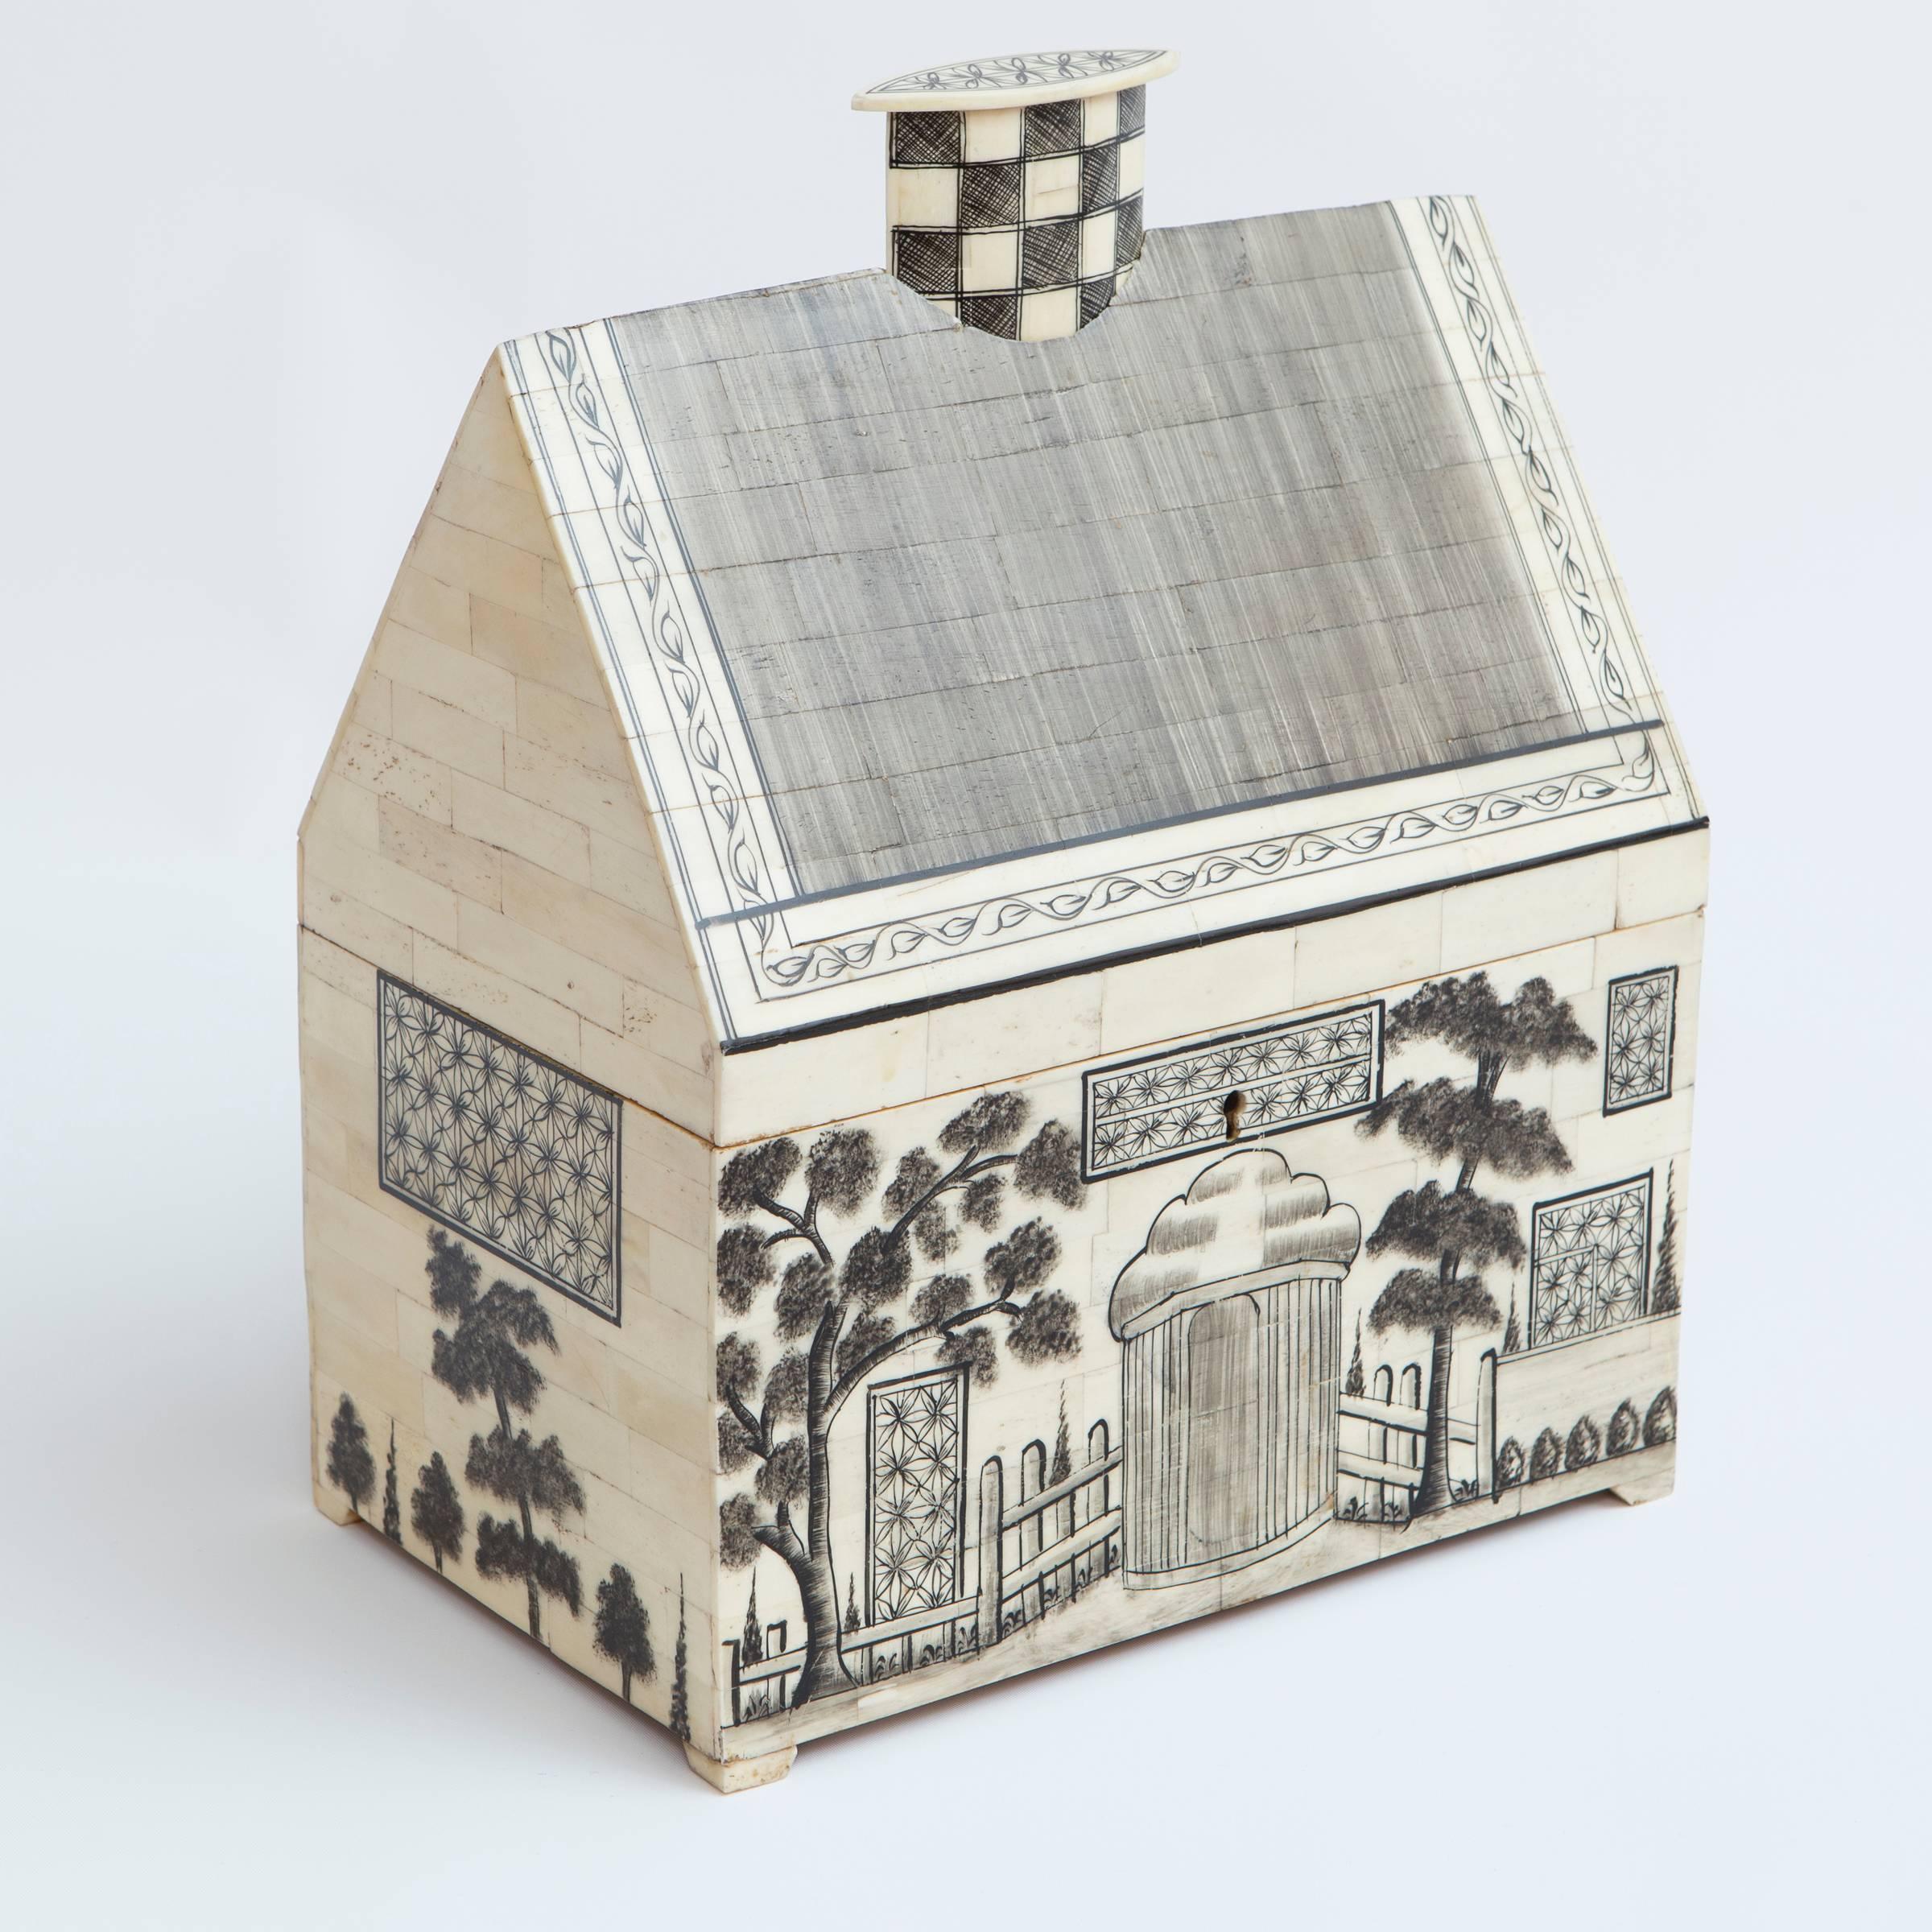 Decorative bone box in the shape of a house in the style of Anglo-Indian.